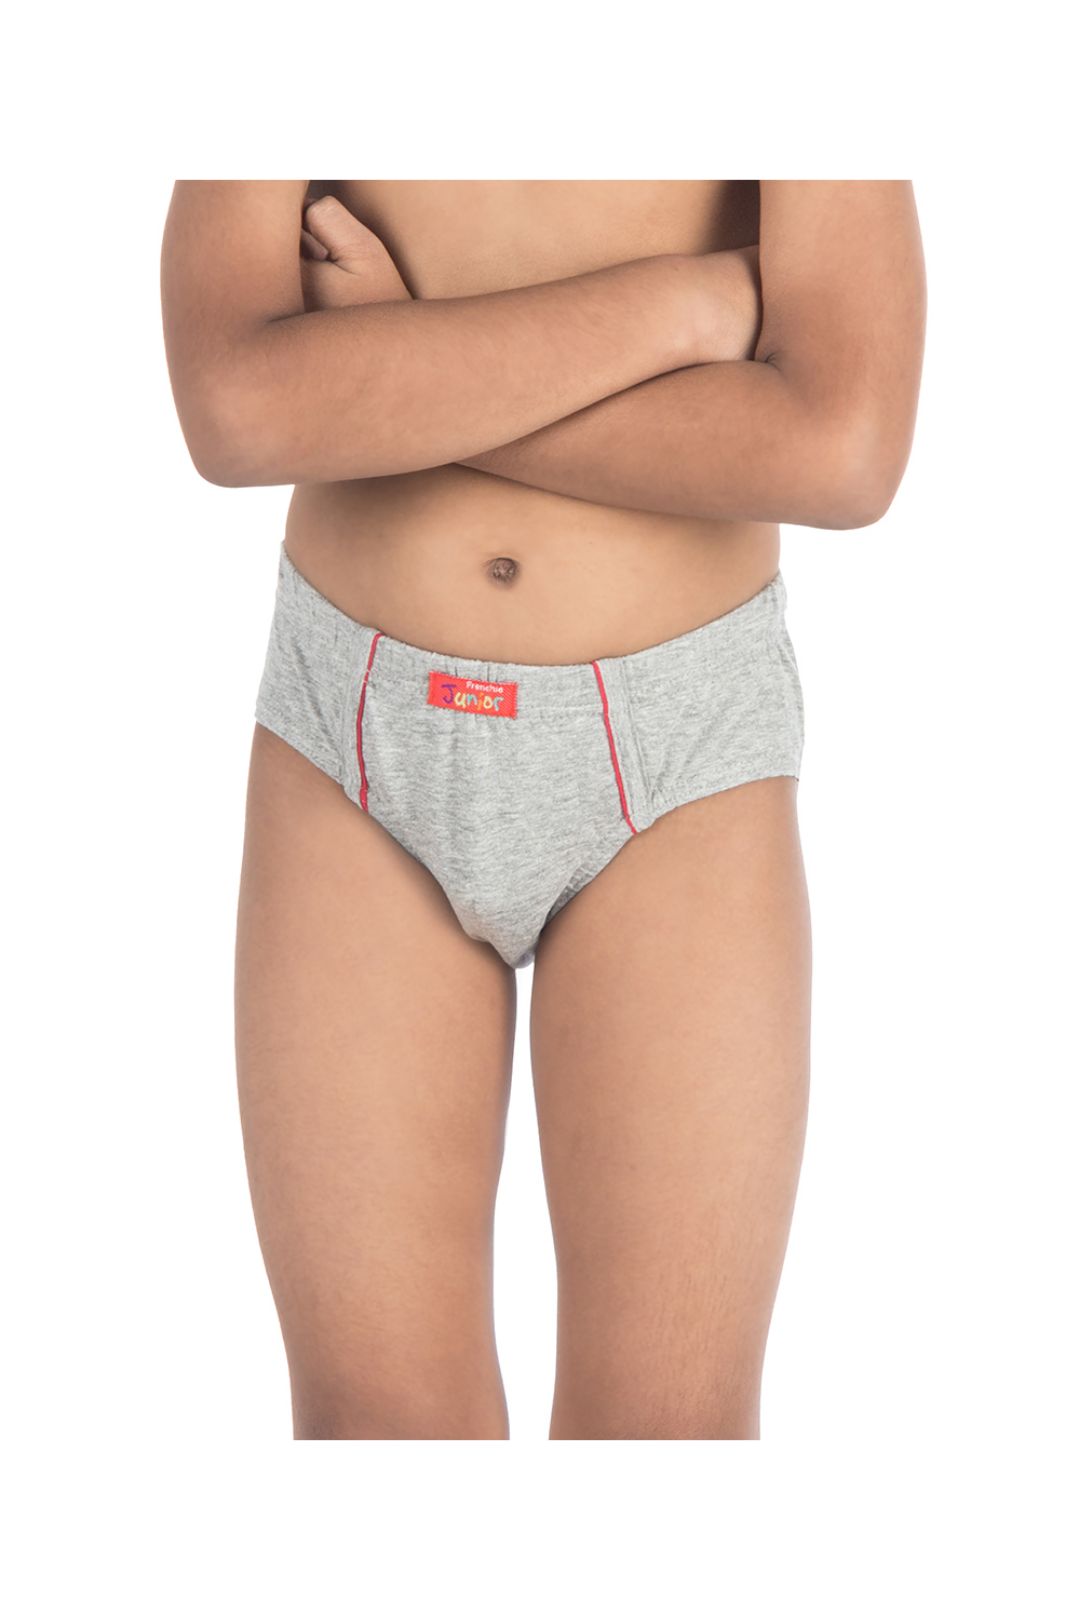 Boys Underwear  Buy Underwear for Buys Online in India at Best Price – VIP  Clothing Limited